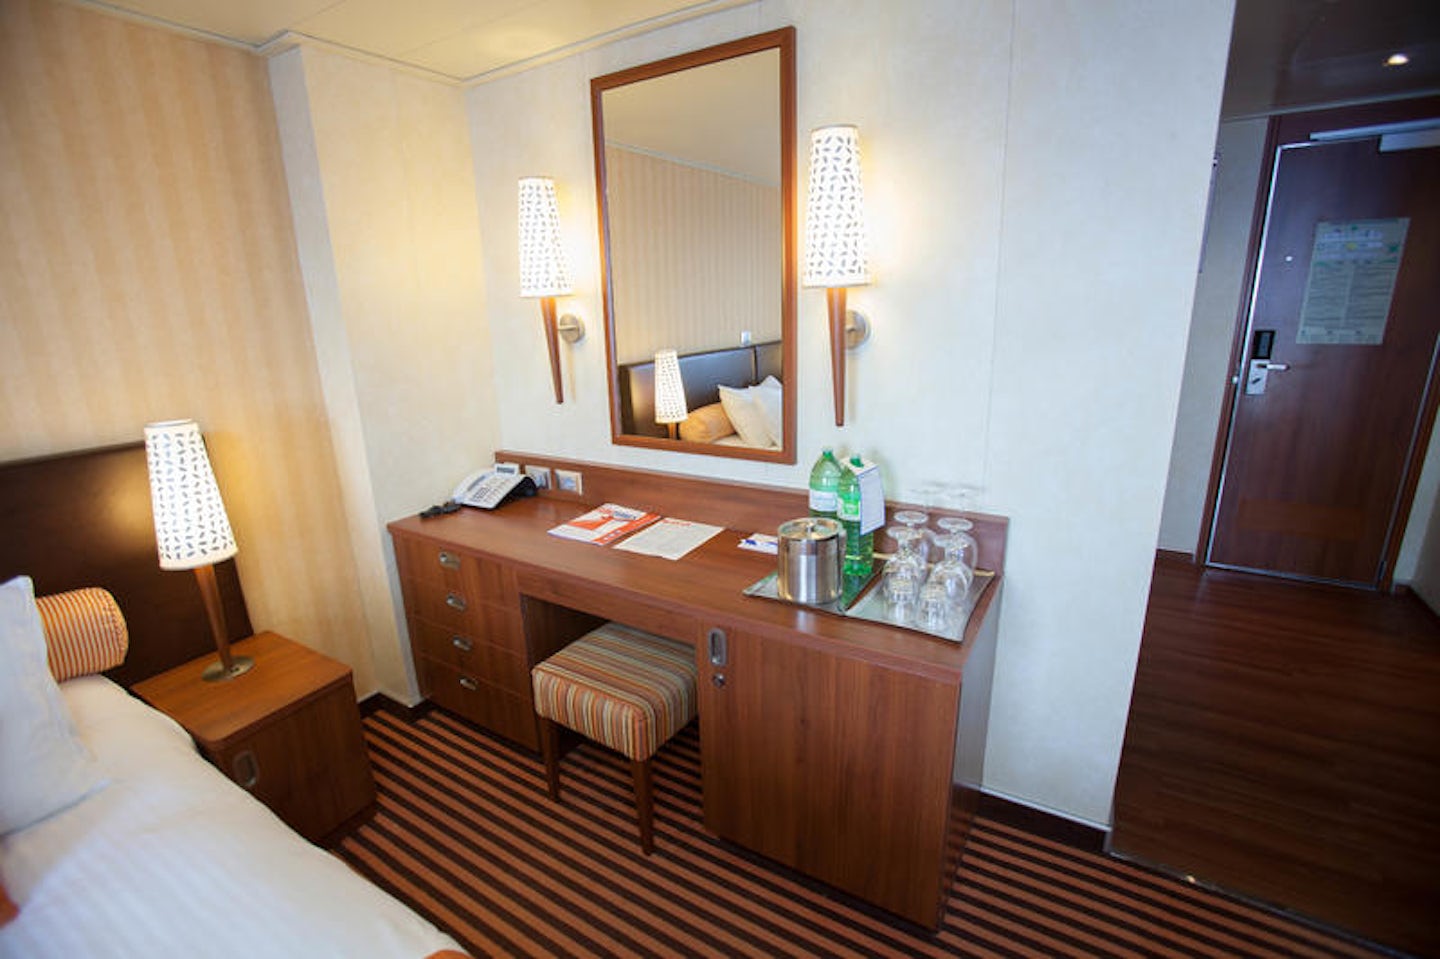 The Grand Suite Cabin on Carnival Breeze